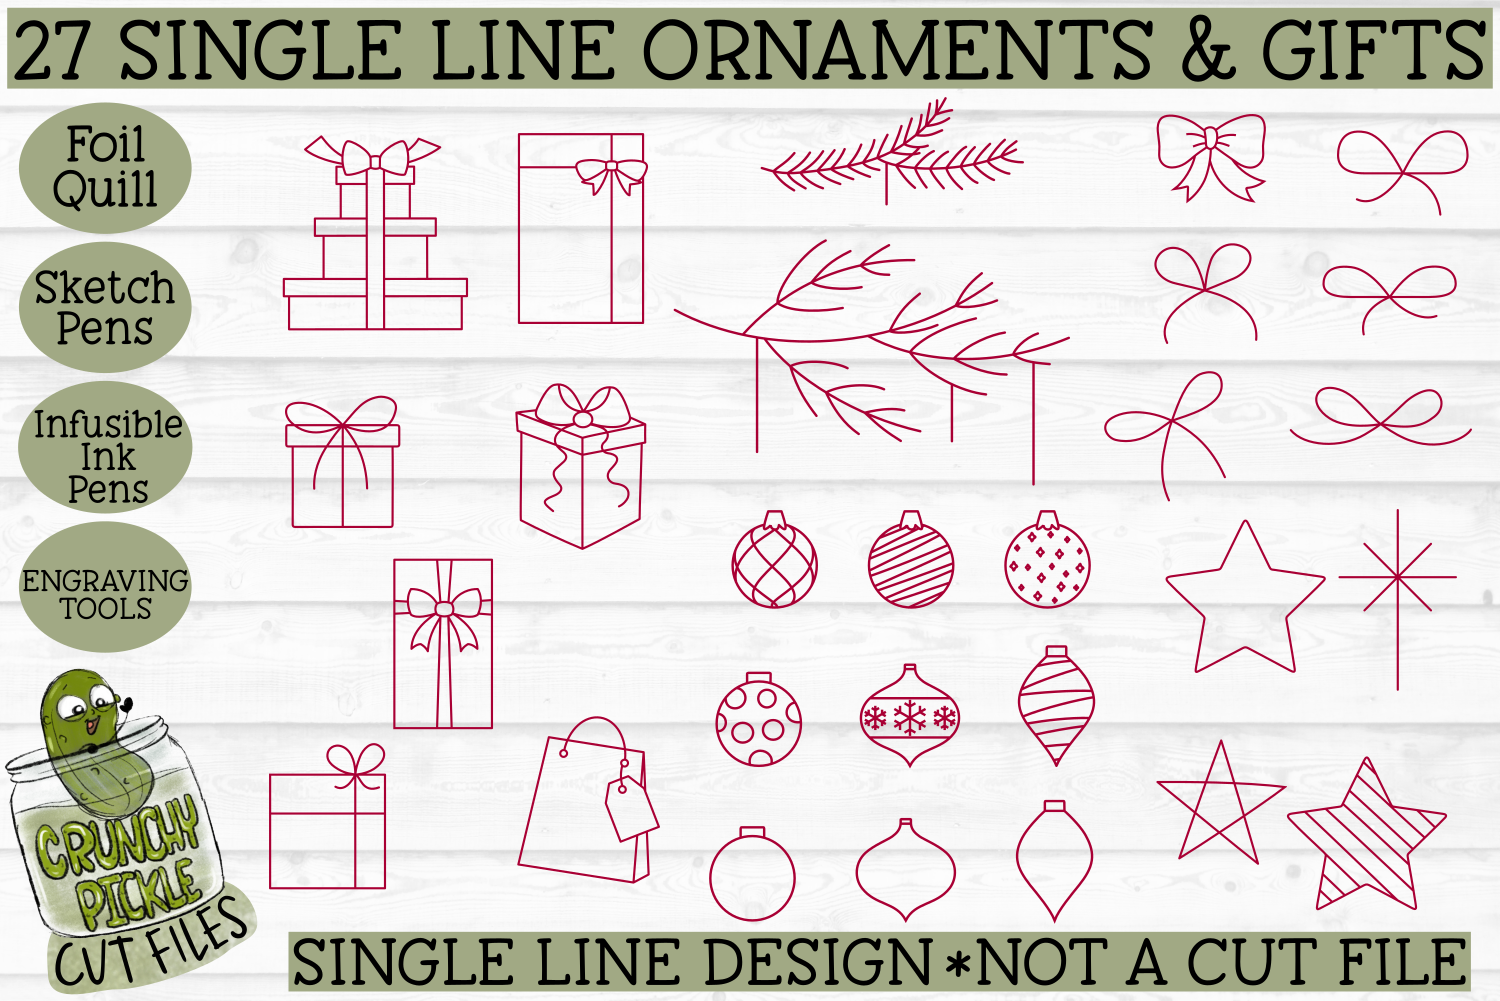 Foil Quill 27 Christmas Ornaments Gifts Set Single Line Svg Design By Crunchy Pickle Thehungryjpeg Com